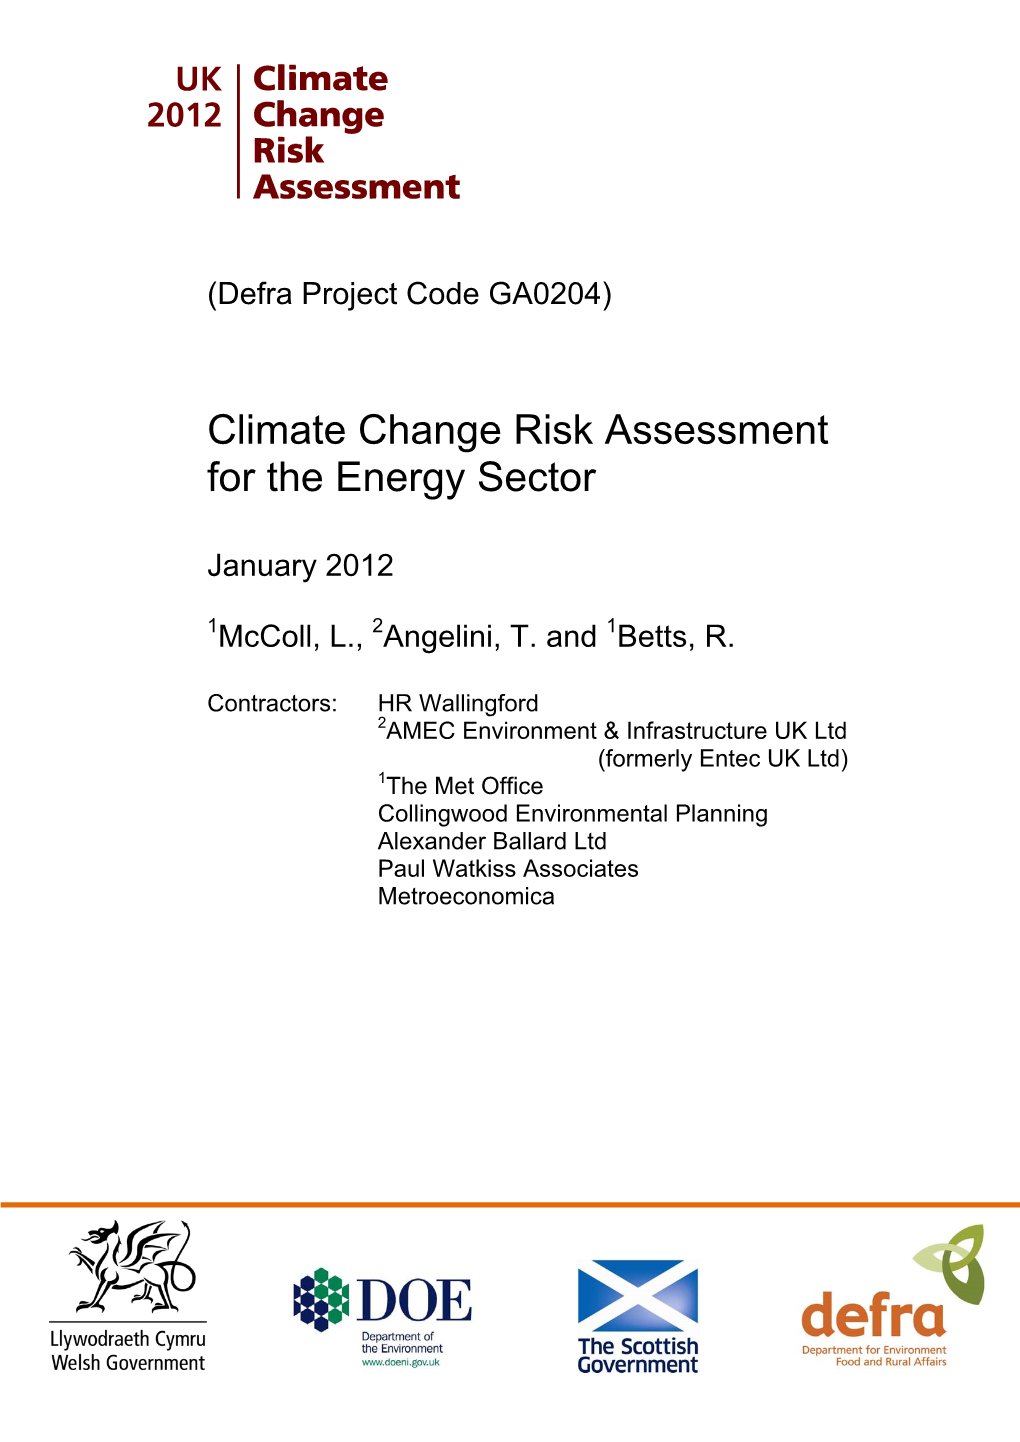 Climate Change Risk Assessment for the Energy Sector